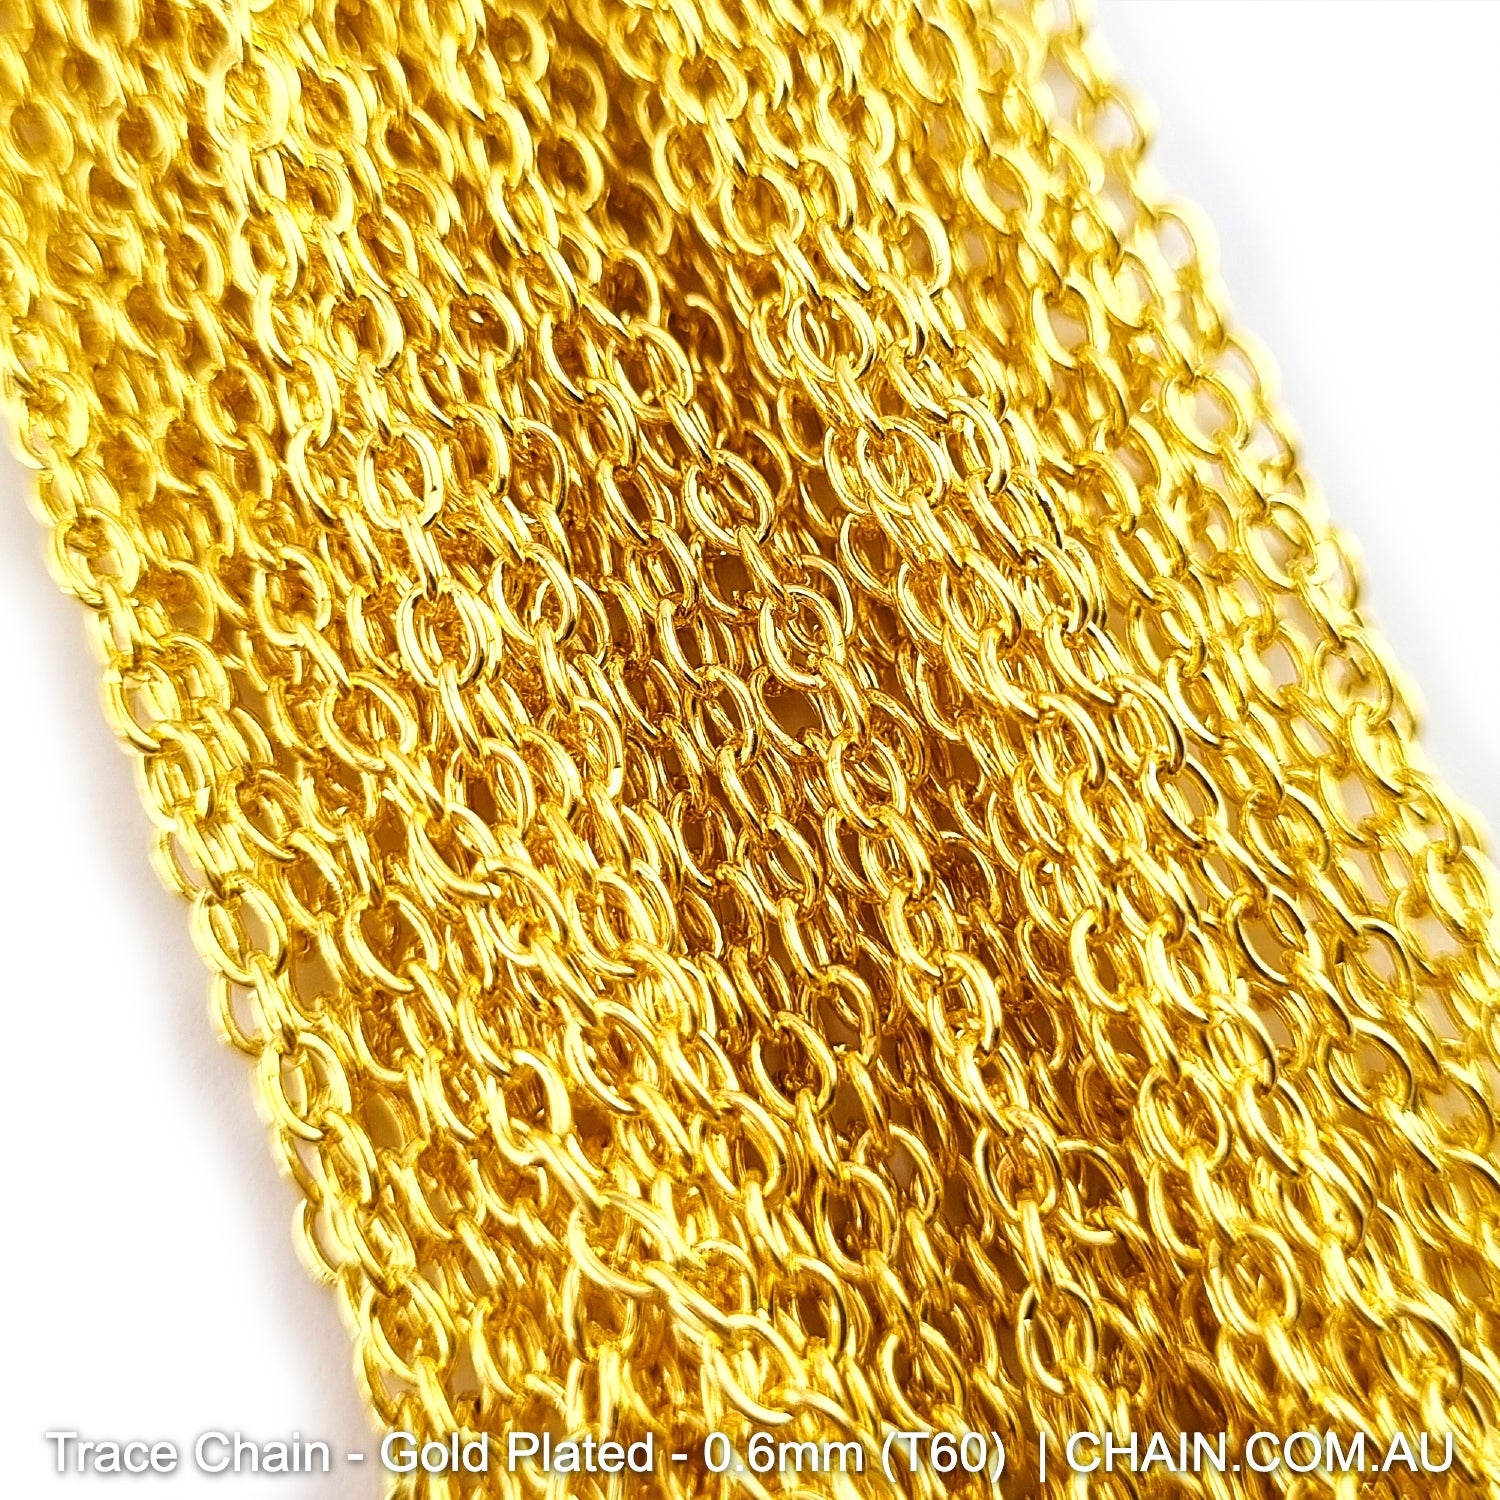 Gold Plated Trace Chain. Size: 0.6mm, T60. Jewellery Chain, Australia wide shipping. Shop chain.com.au